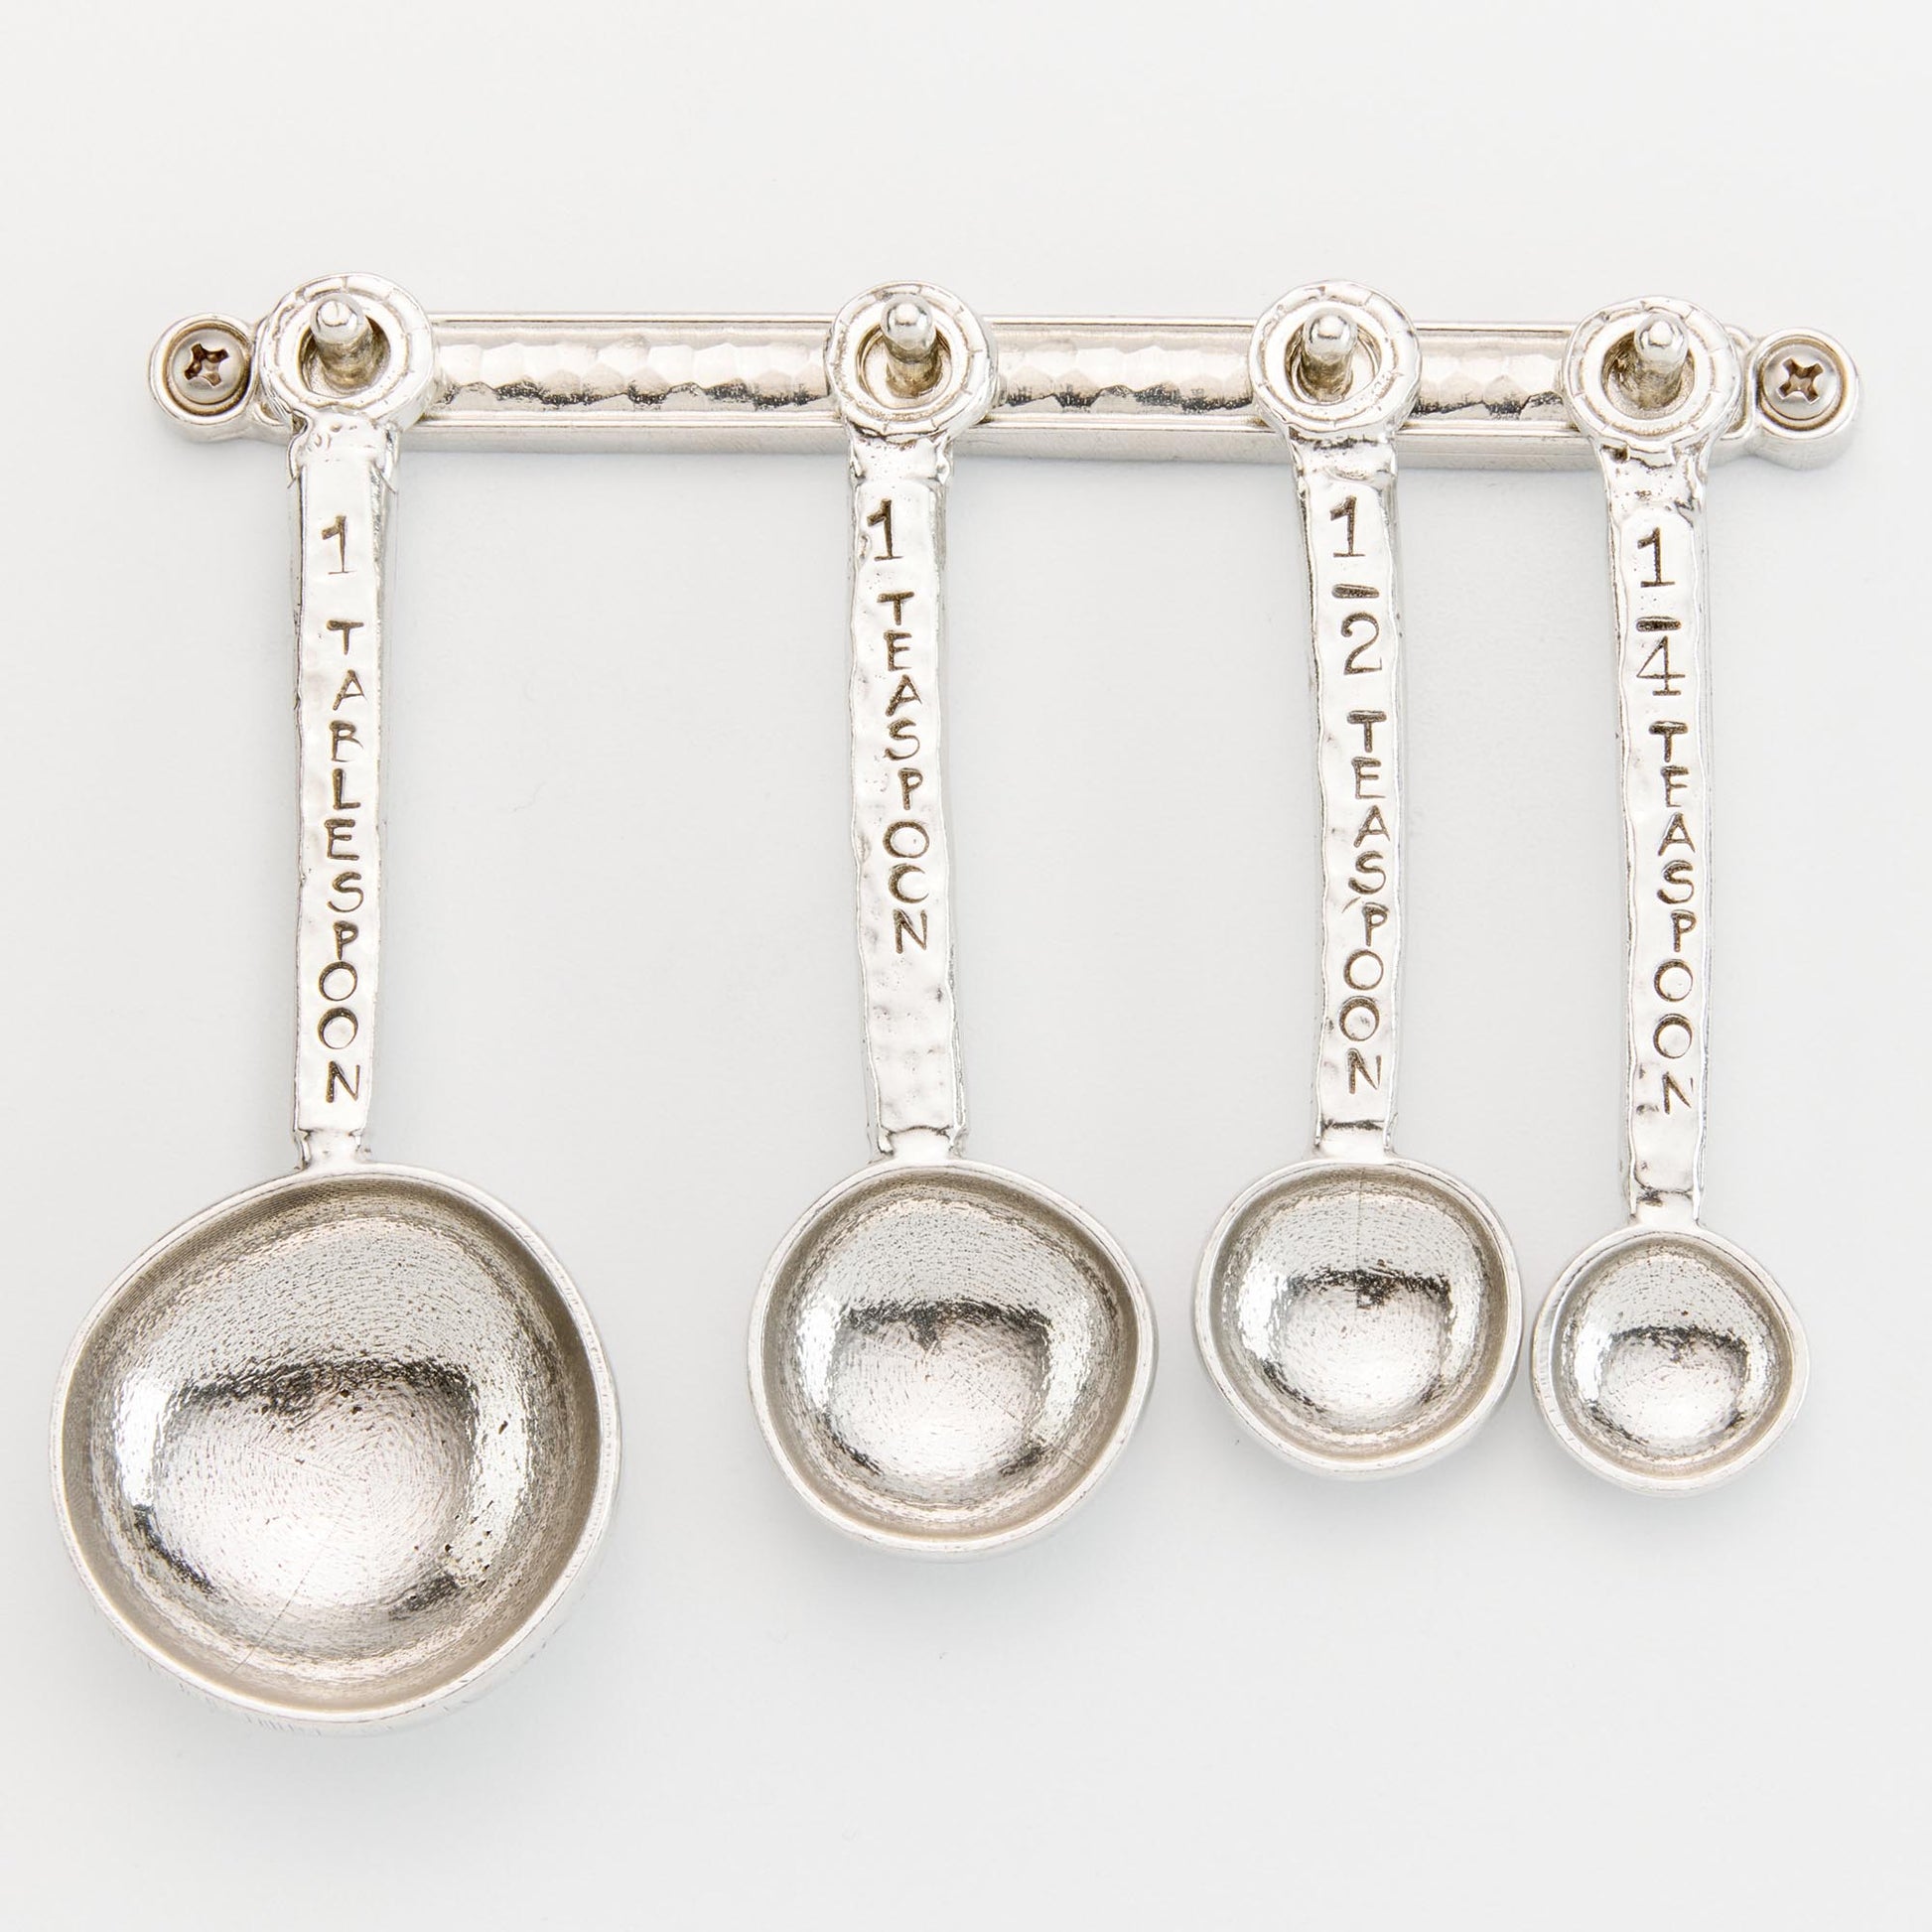 pewter Homestead Measuring Spoons on wall strip